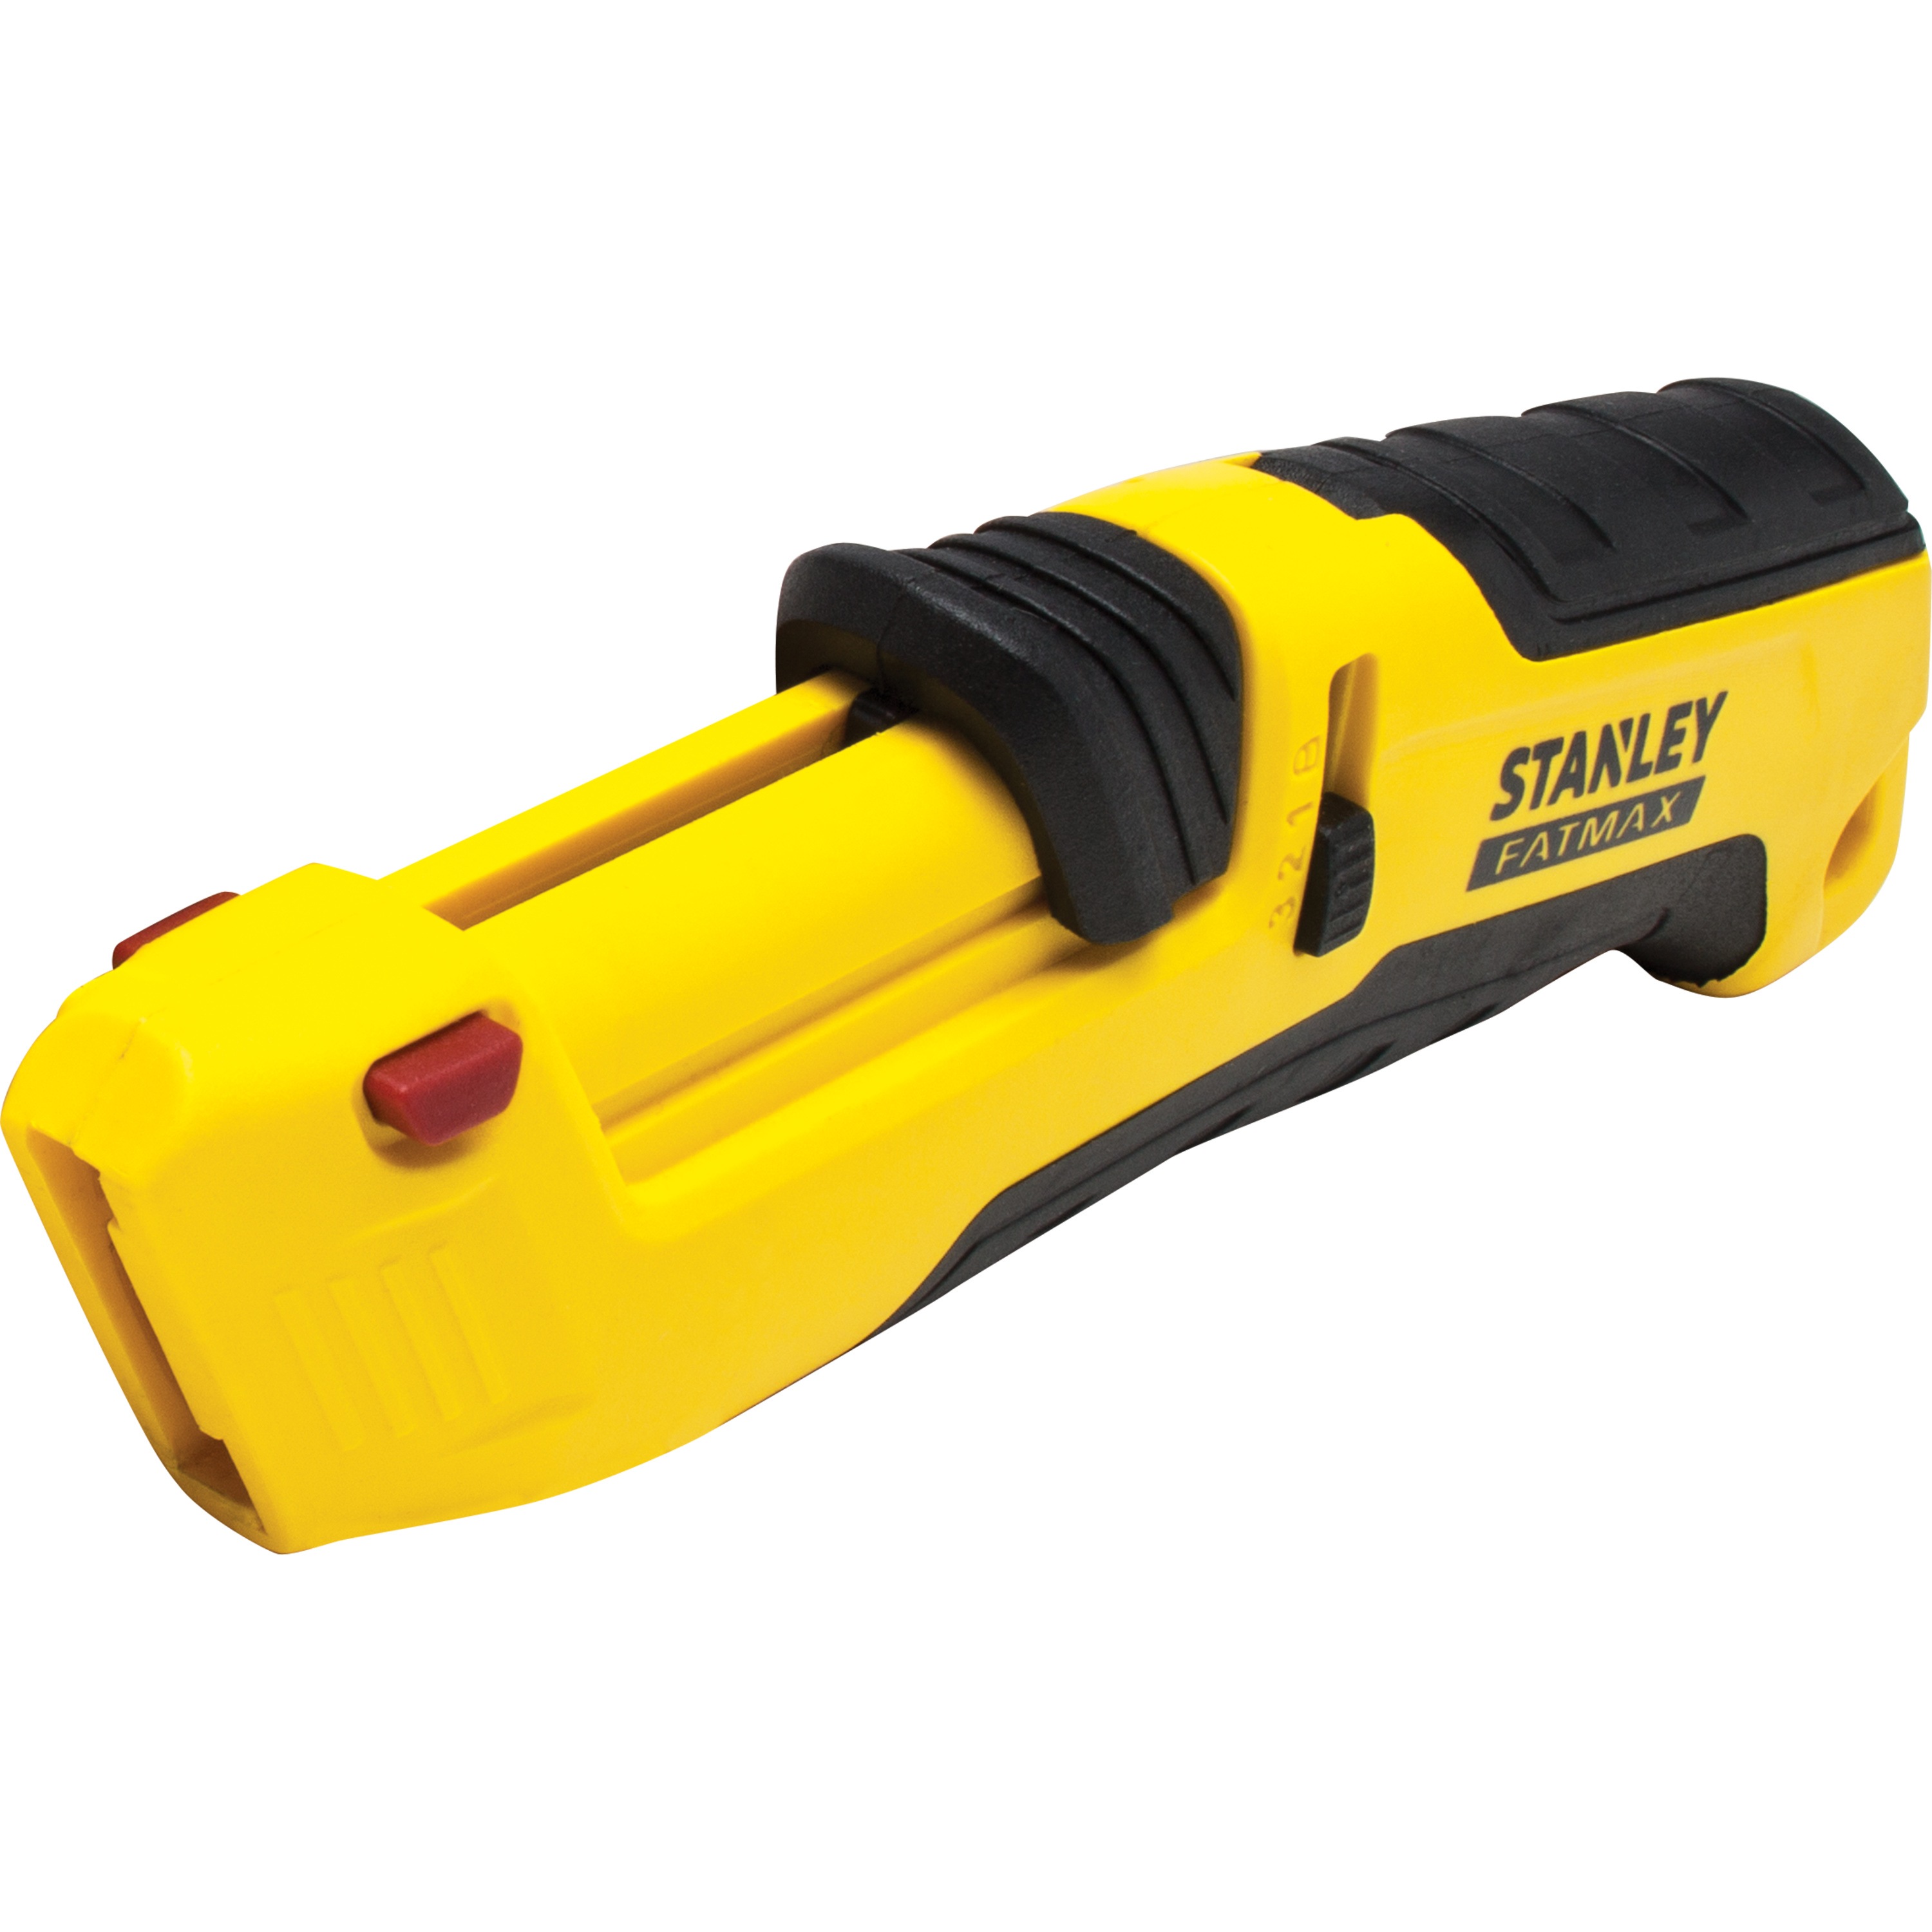 Stanley Tools - FATMAX AutoRetract TriSlide Safety Knife - FMHT10365